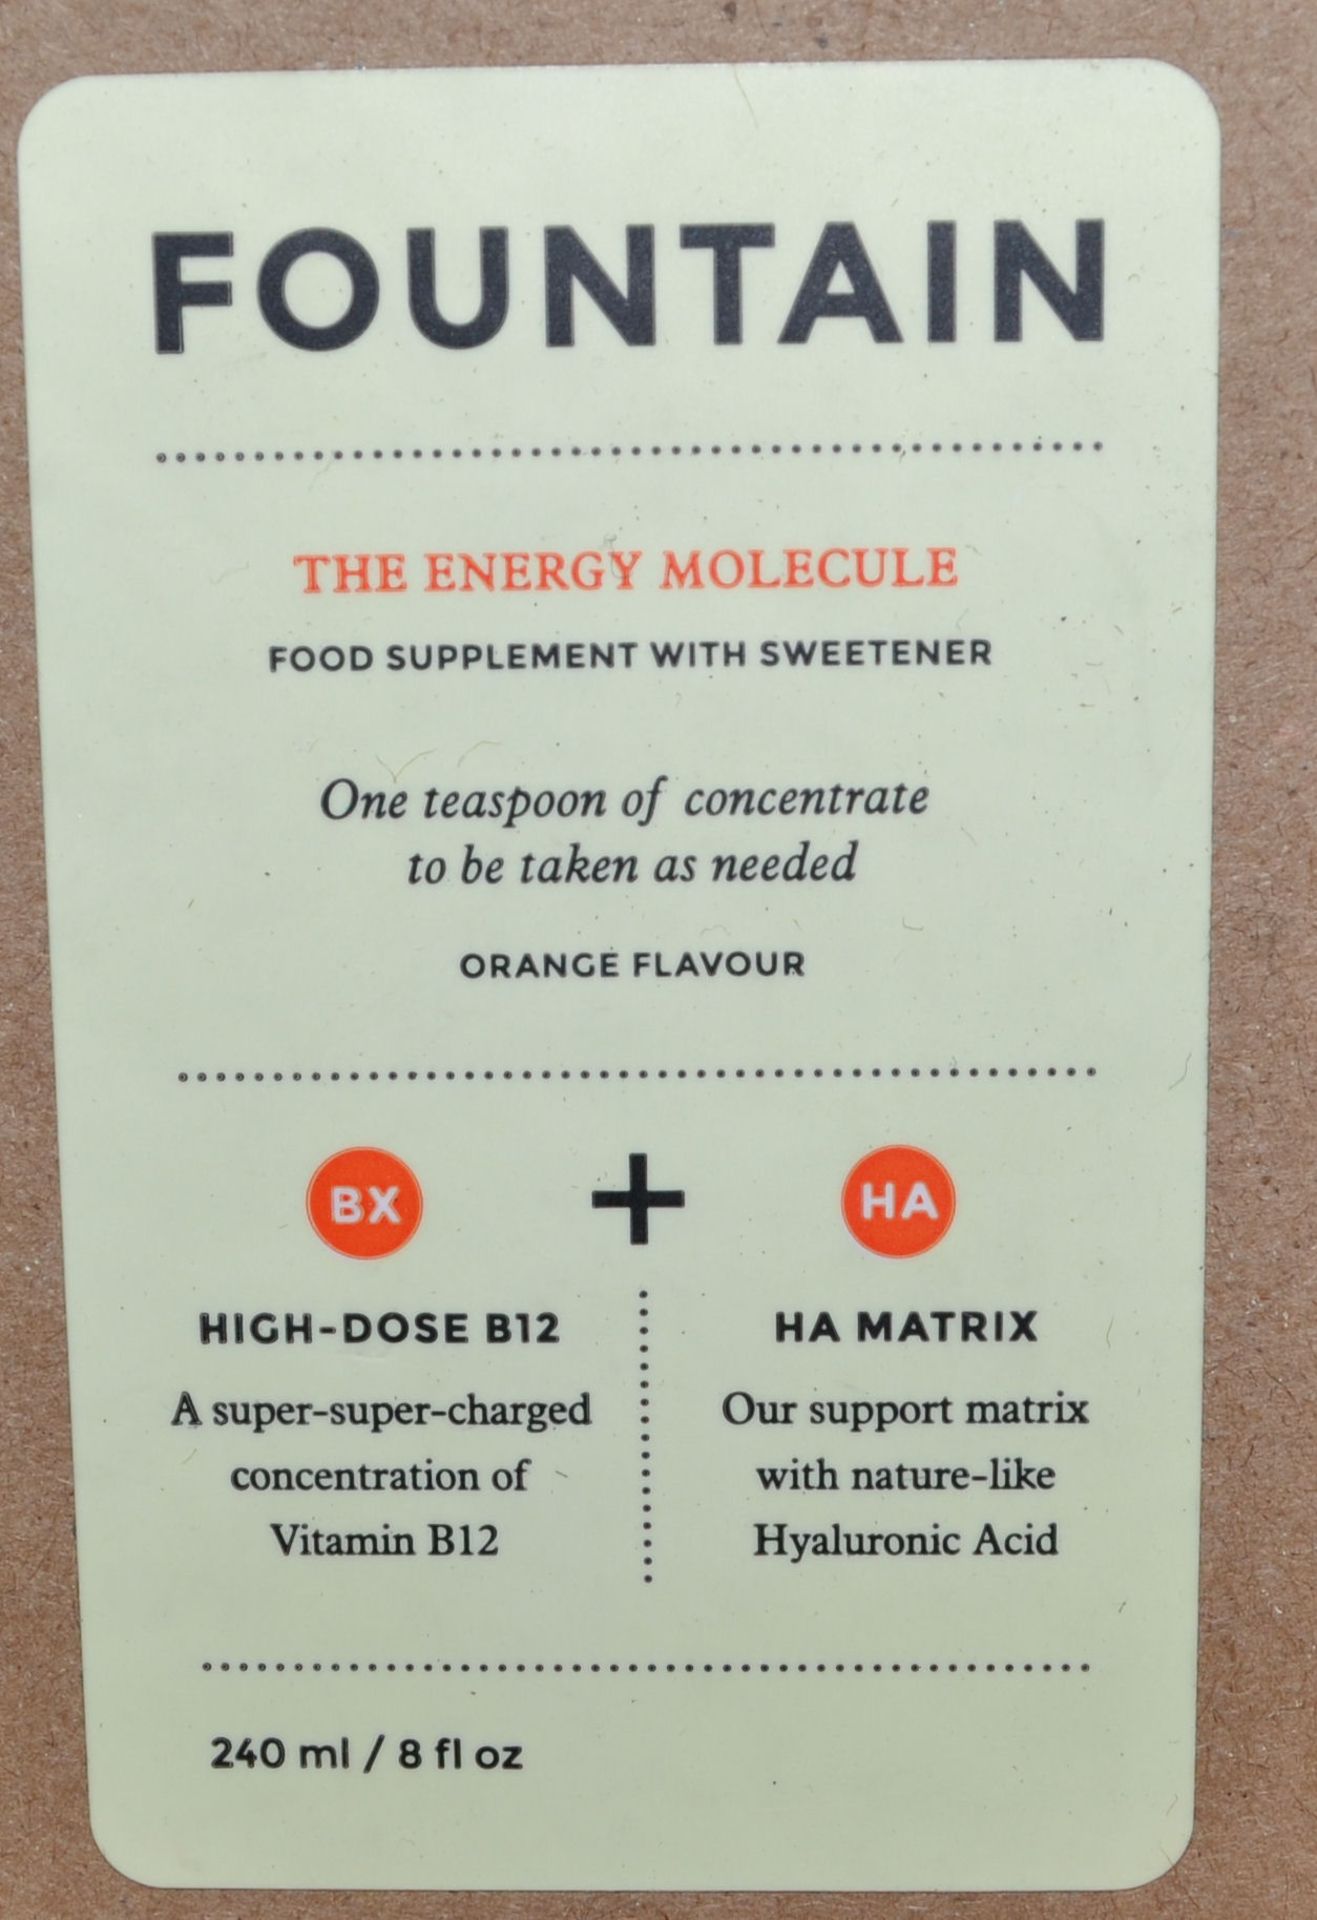 20 x 240ml Bottles of Fountain, The Energy Molecule Supplement - New & Boxed - CL185 - Ref: DRT0643 - Image 3 of 6